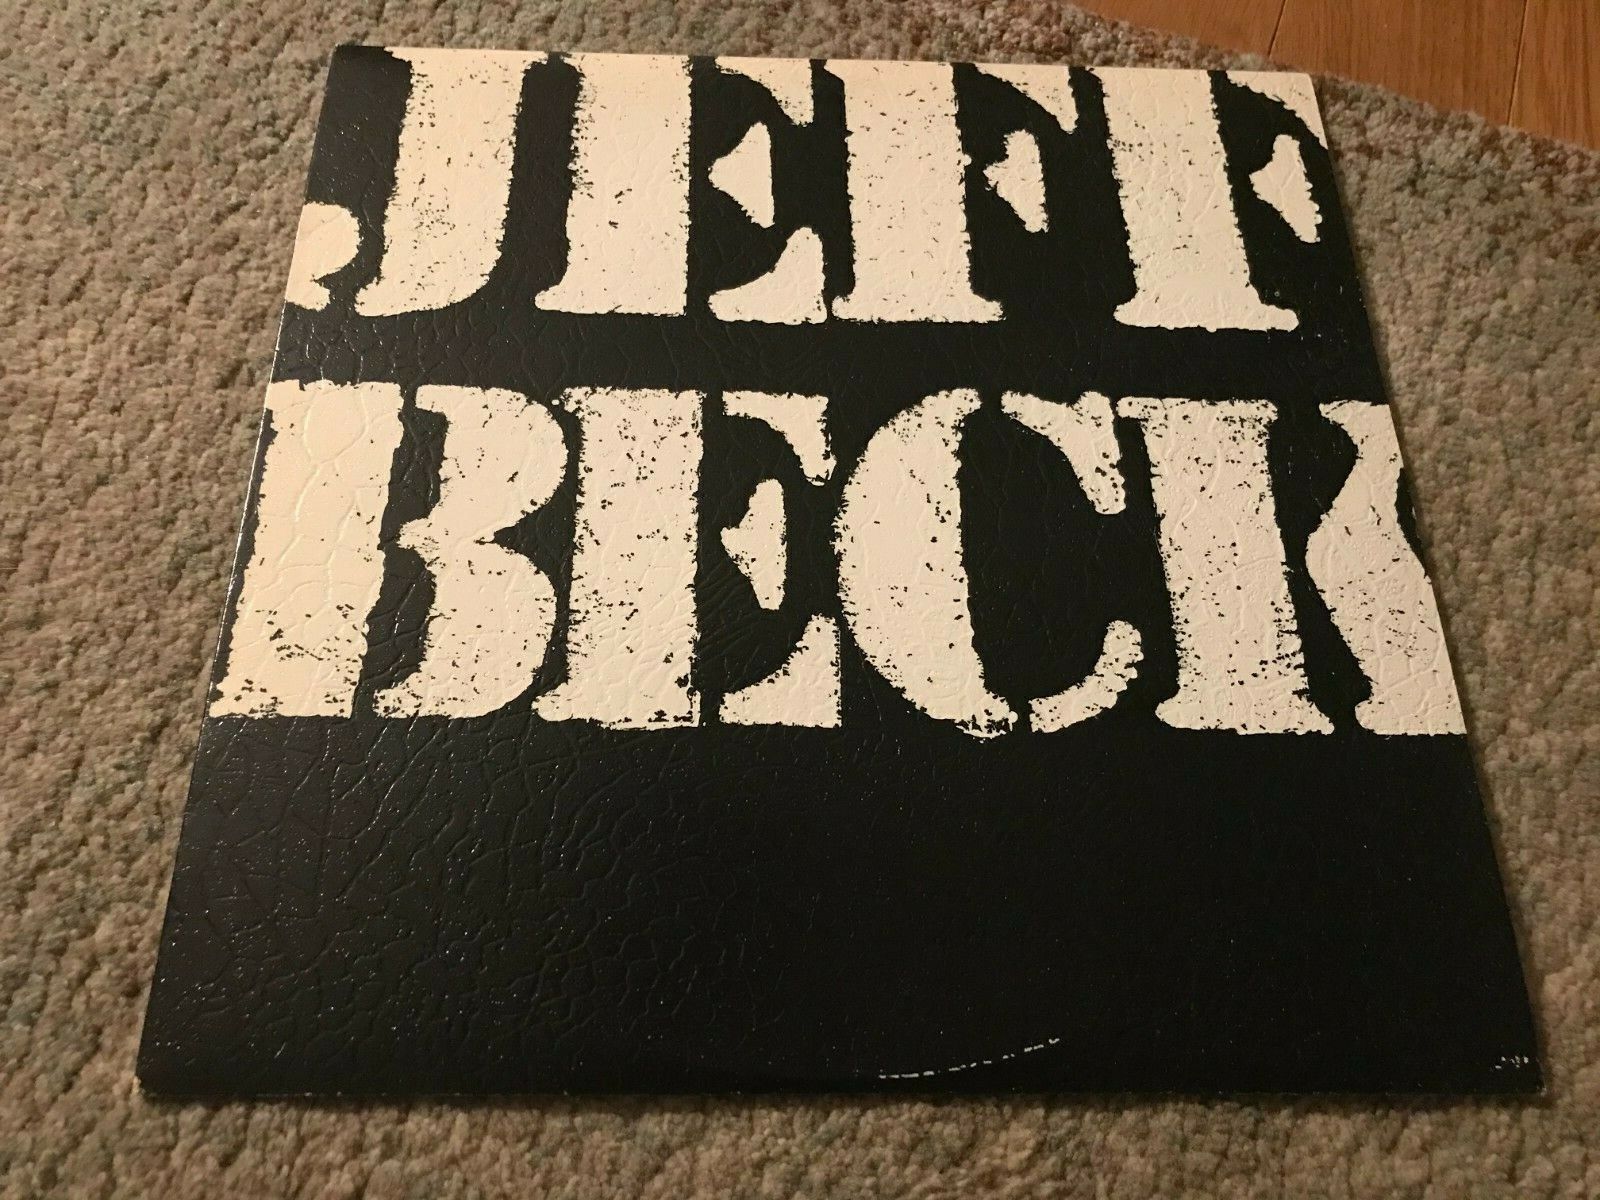 JEFF BECK - THERE AND BACK Vinyl LP Album BL 35684 PROMO